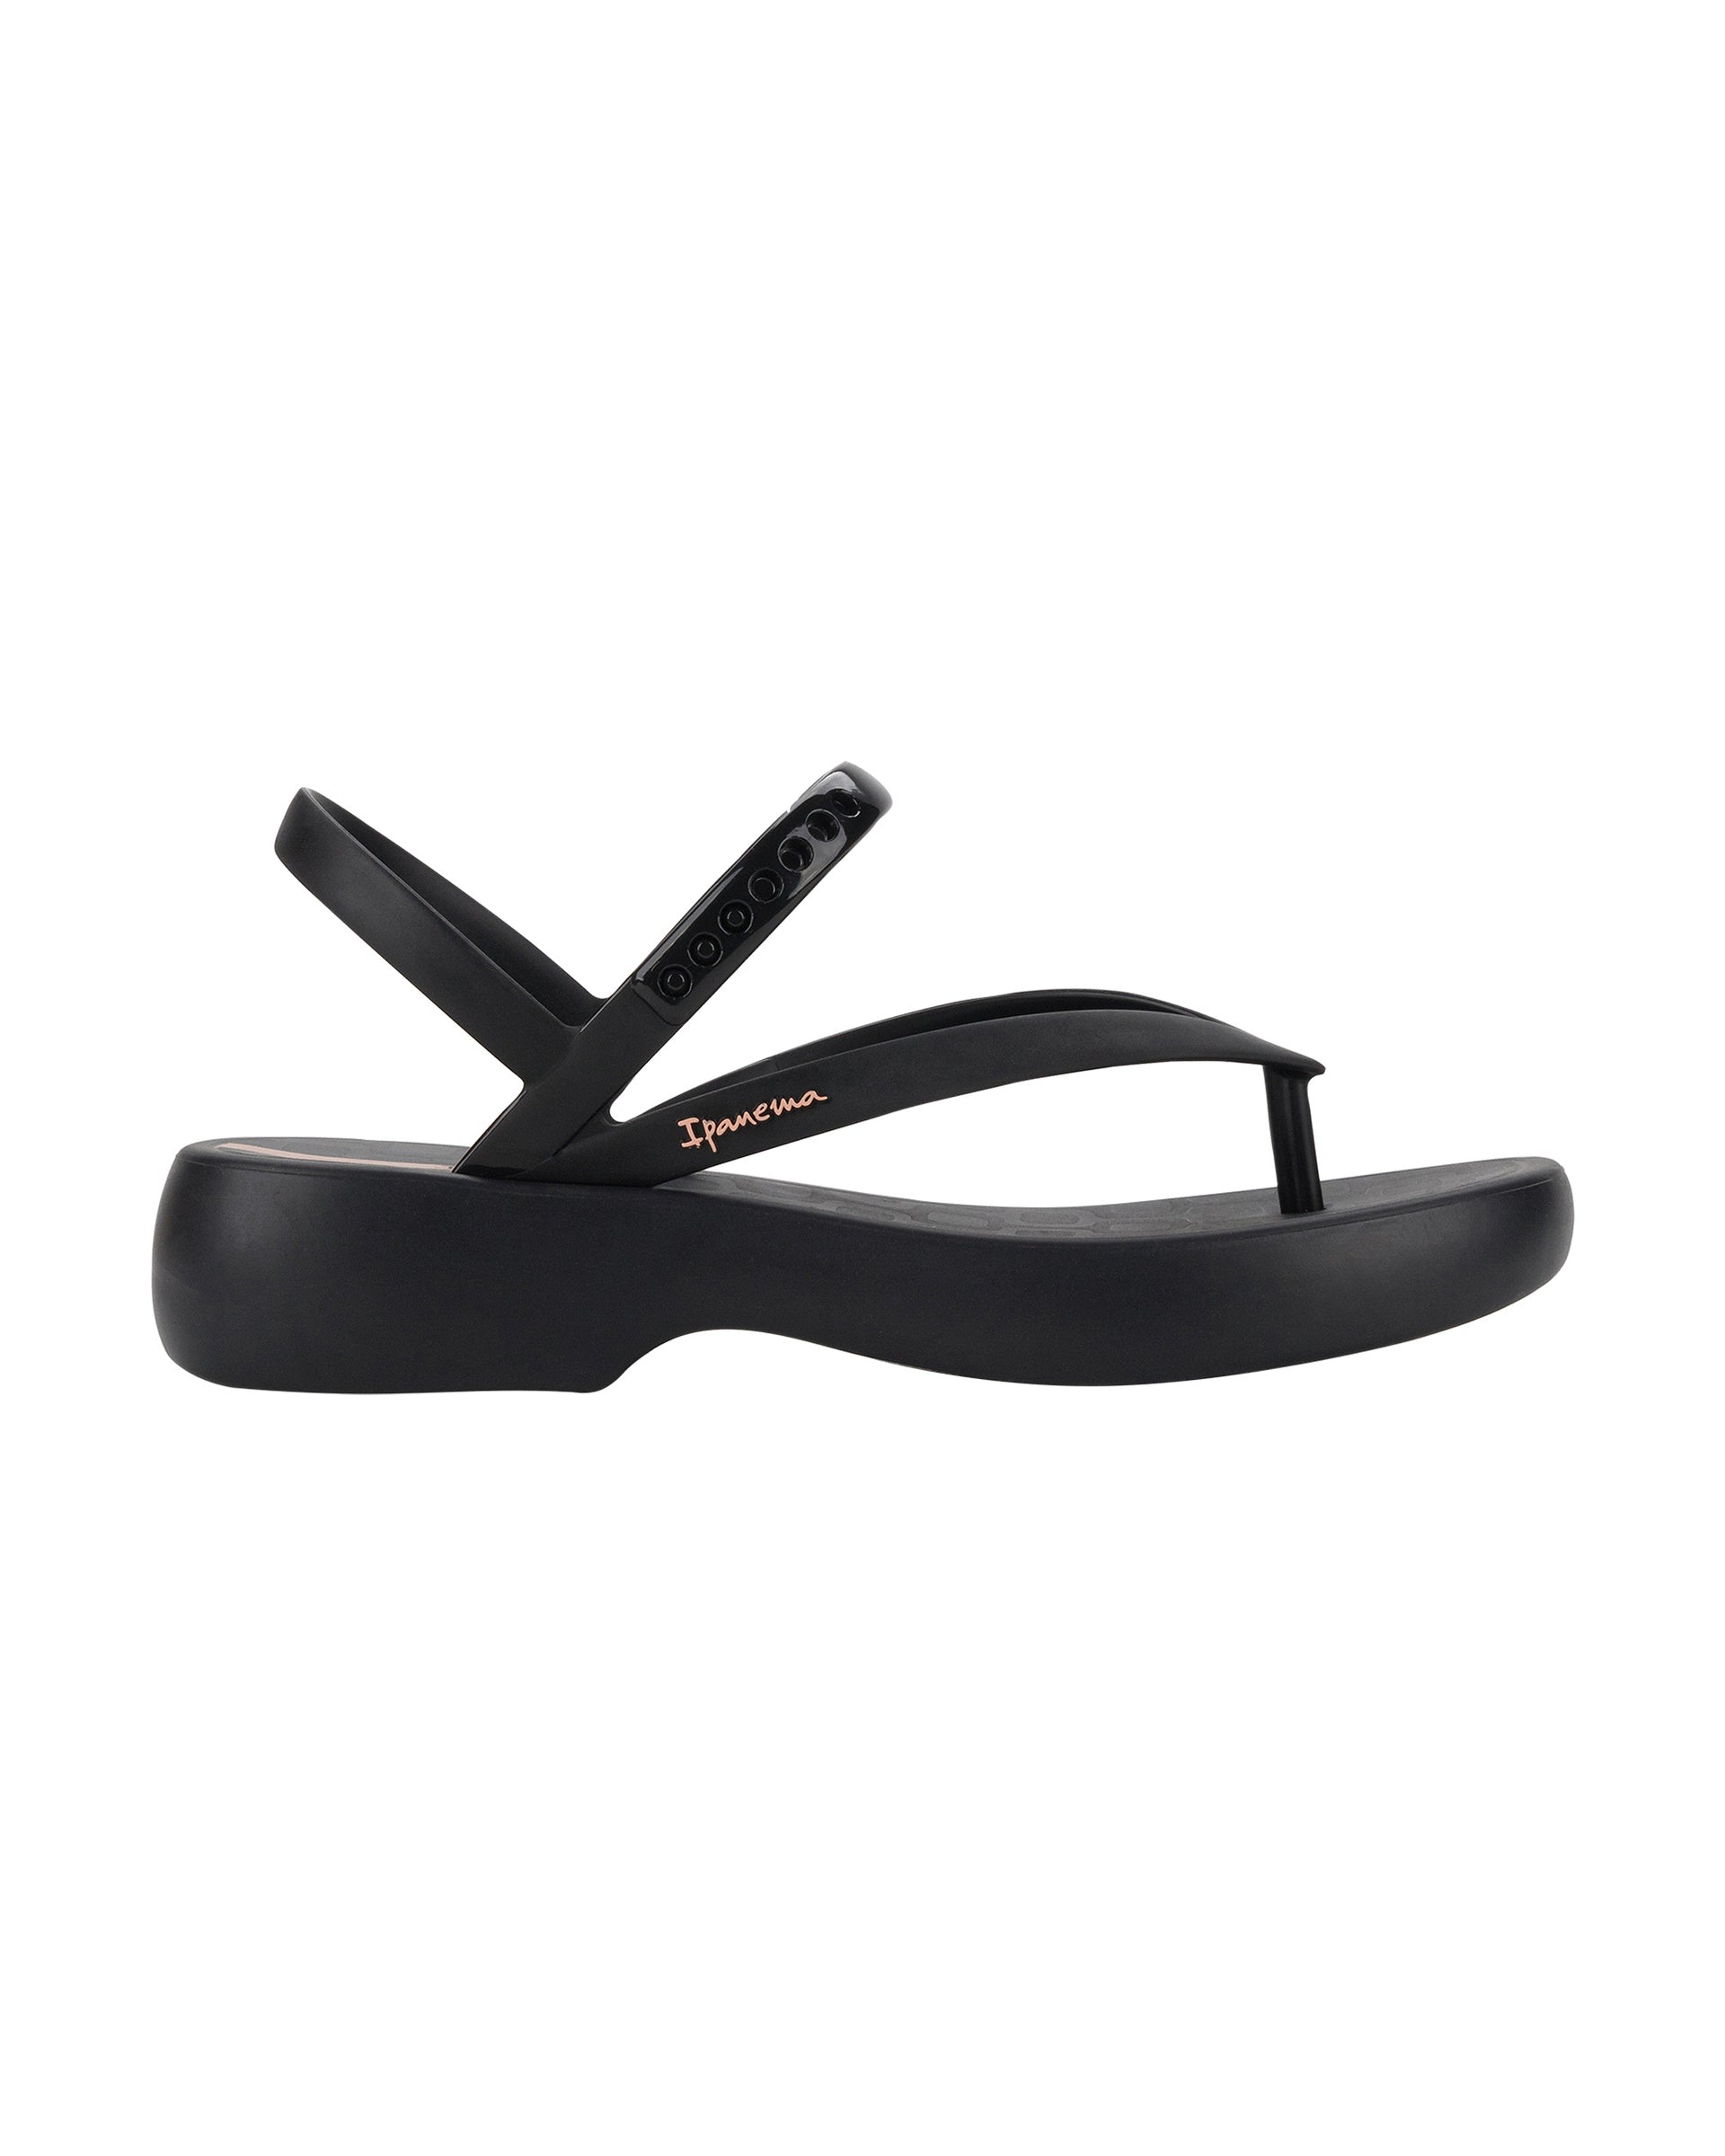 Outer side view of a black Ipanema Verano women's sandal.